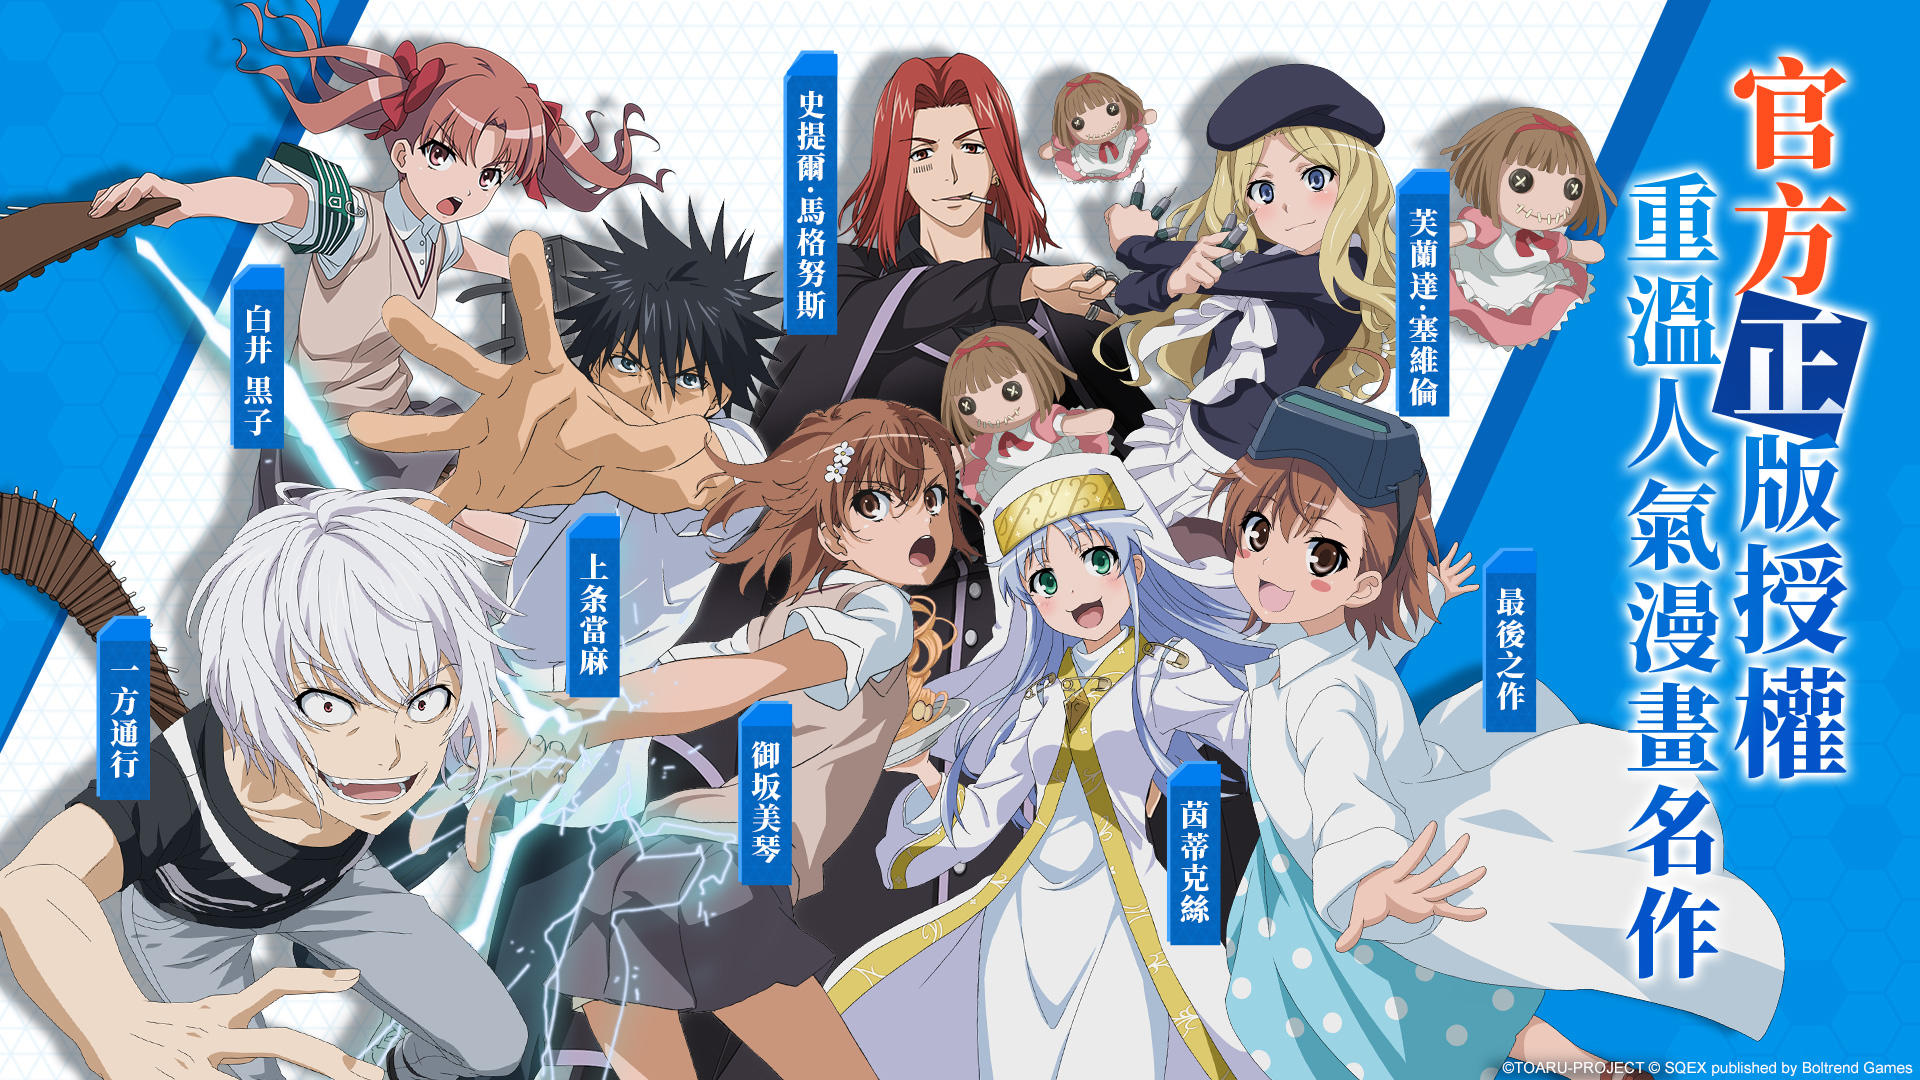 Why You Should Watch A Certain Magical Index | by The Danime Times | Medium